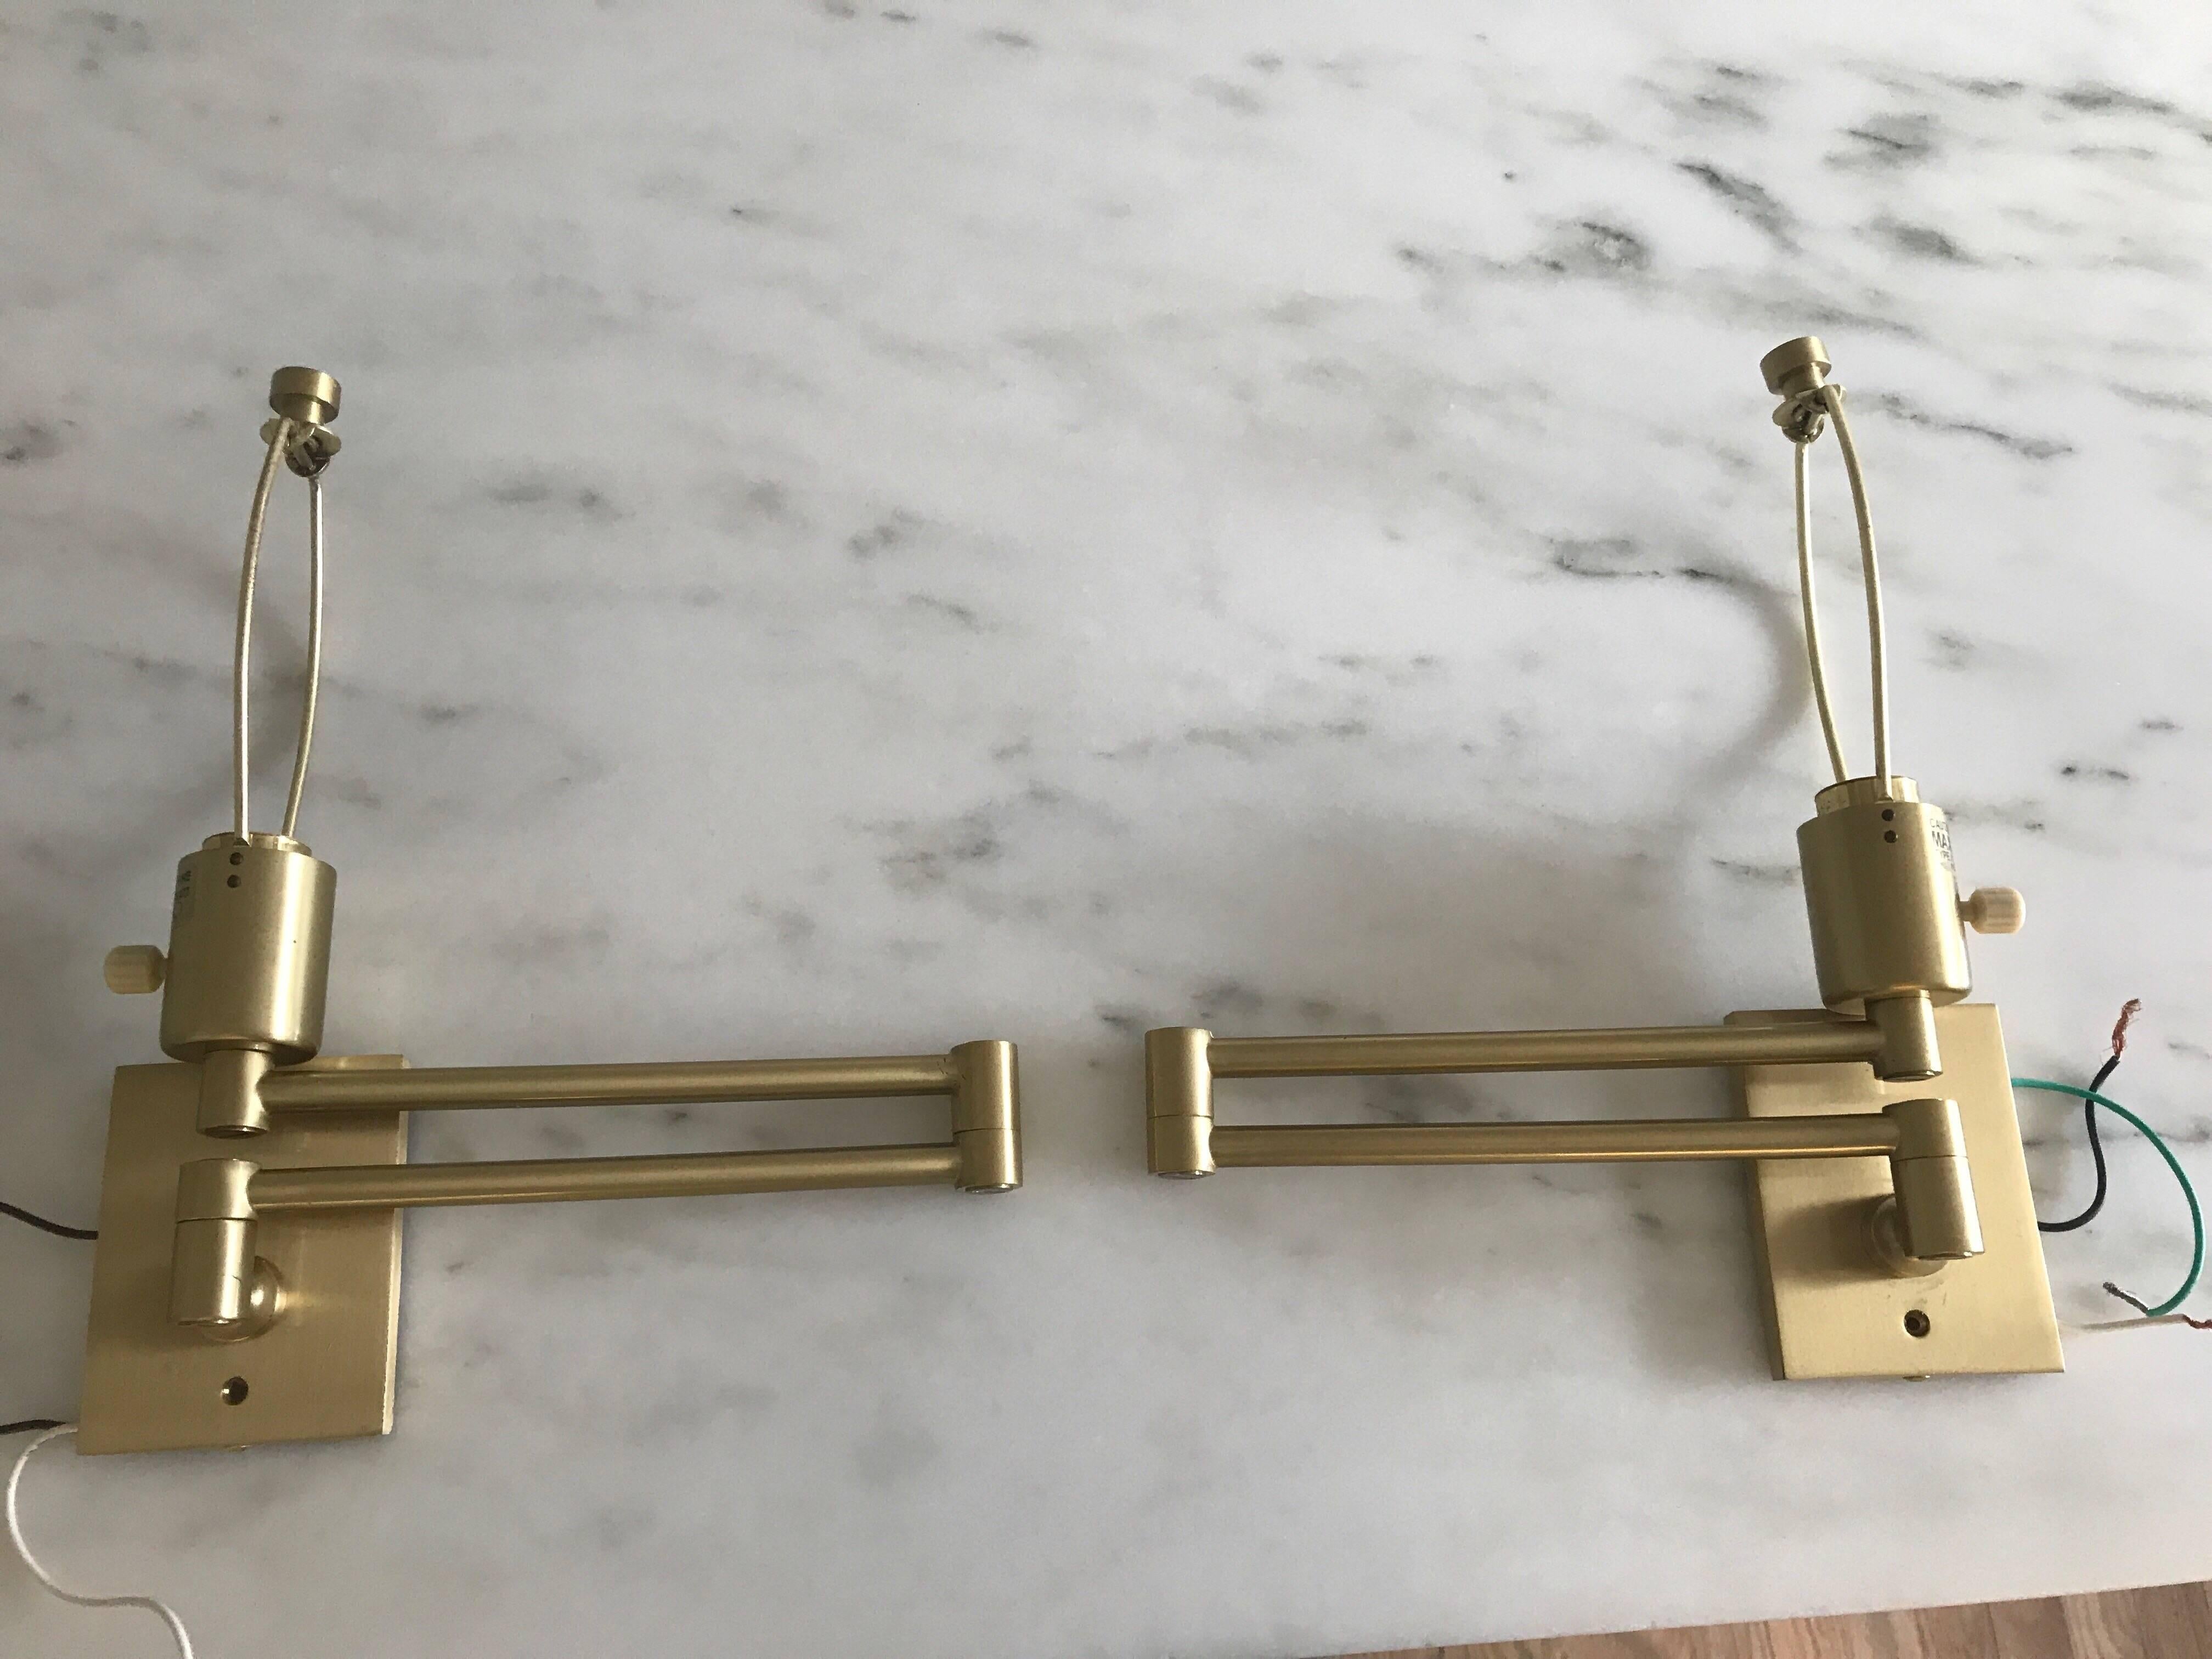 Hansen brass swing arm lamps for Hinson & co. Stamped Hansen lamps, New York.
Brass swing arm lamps include two shades and finials. Some wear to finish at edge of back plate. Very good and working condition.
13.5